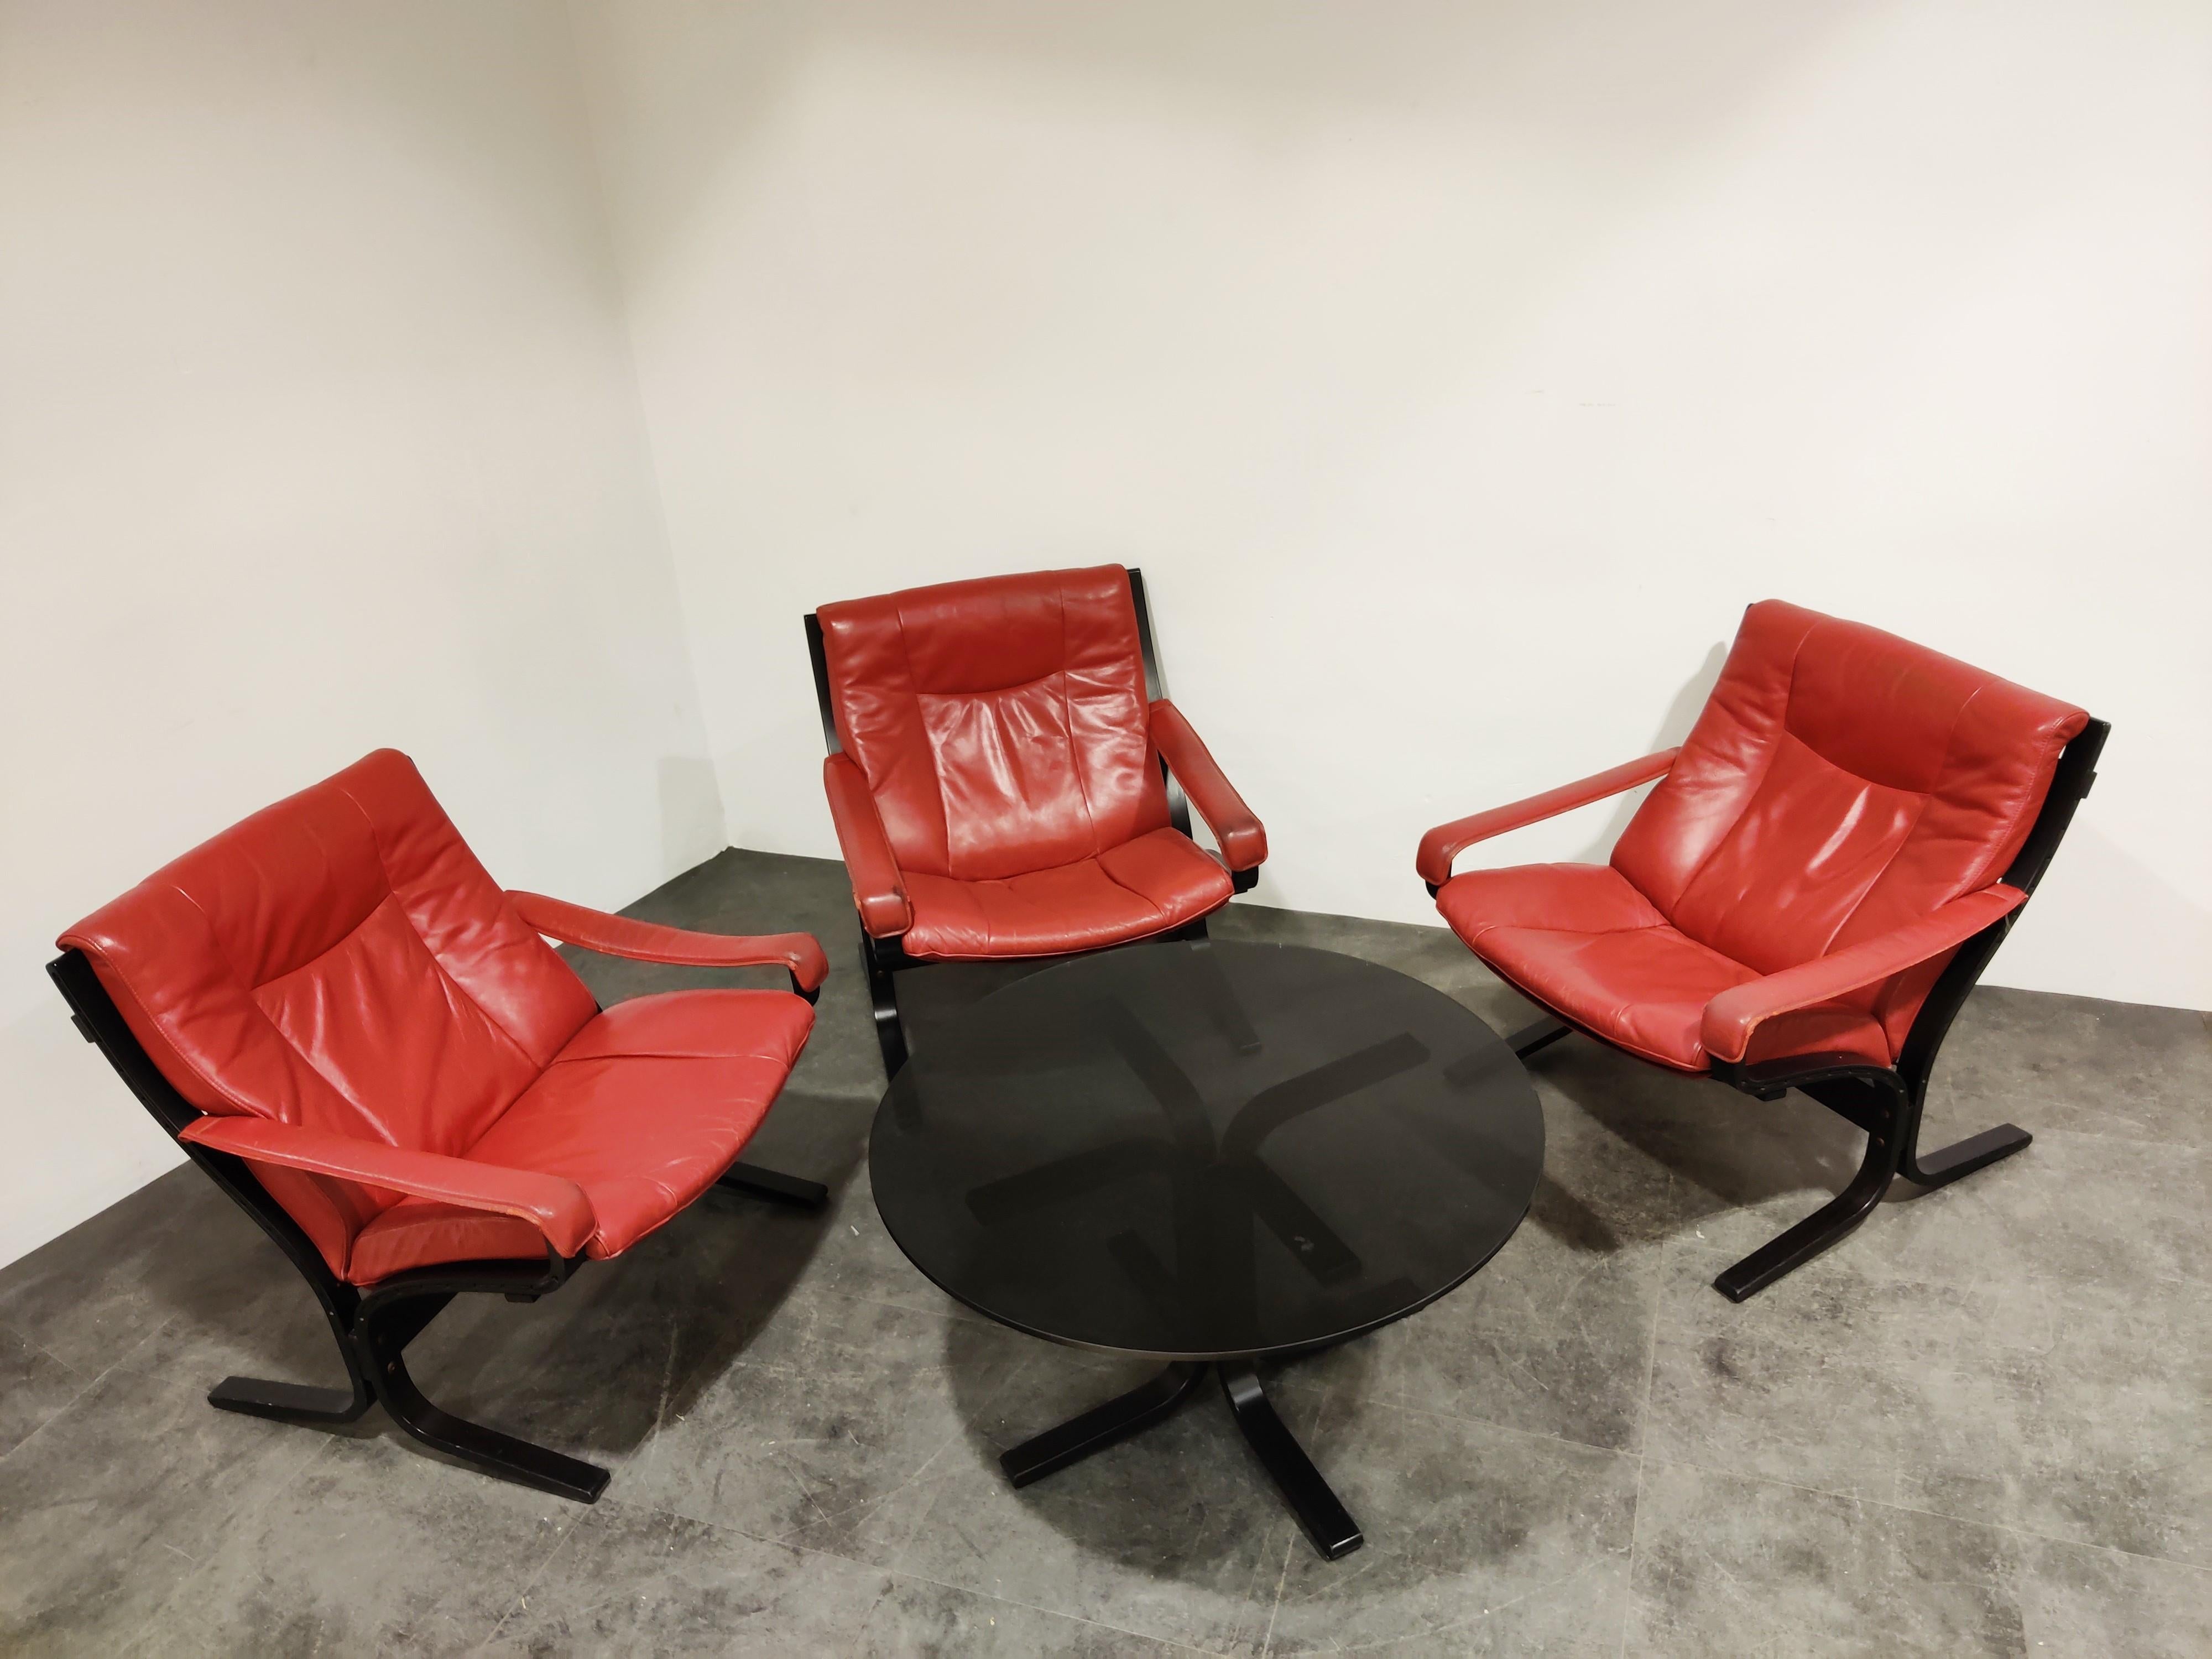 Rare vintage living room set designed by Ingmar Relling for Westnofa.

The set consists of 3 'siesta' armchairs and a matching coffee table.

The armchairs have an original and rare red leather upholstery on a black wooden frame.

The coffee